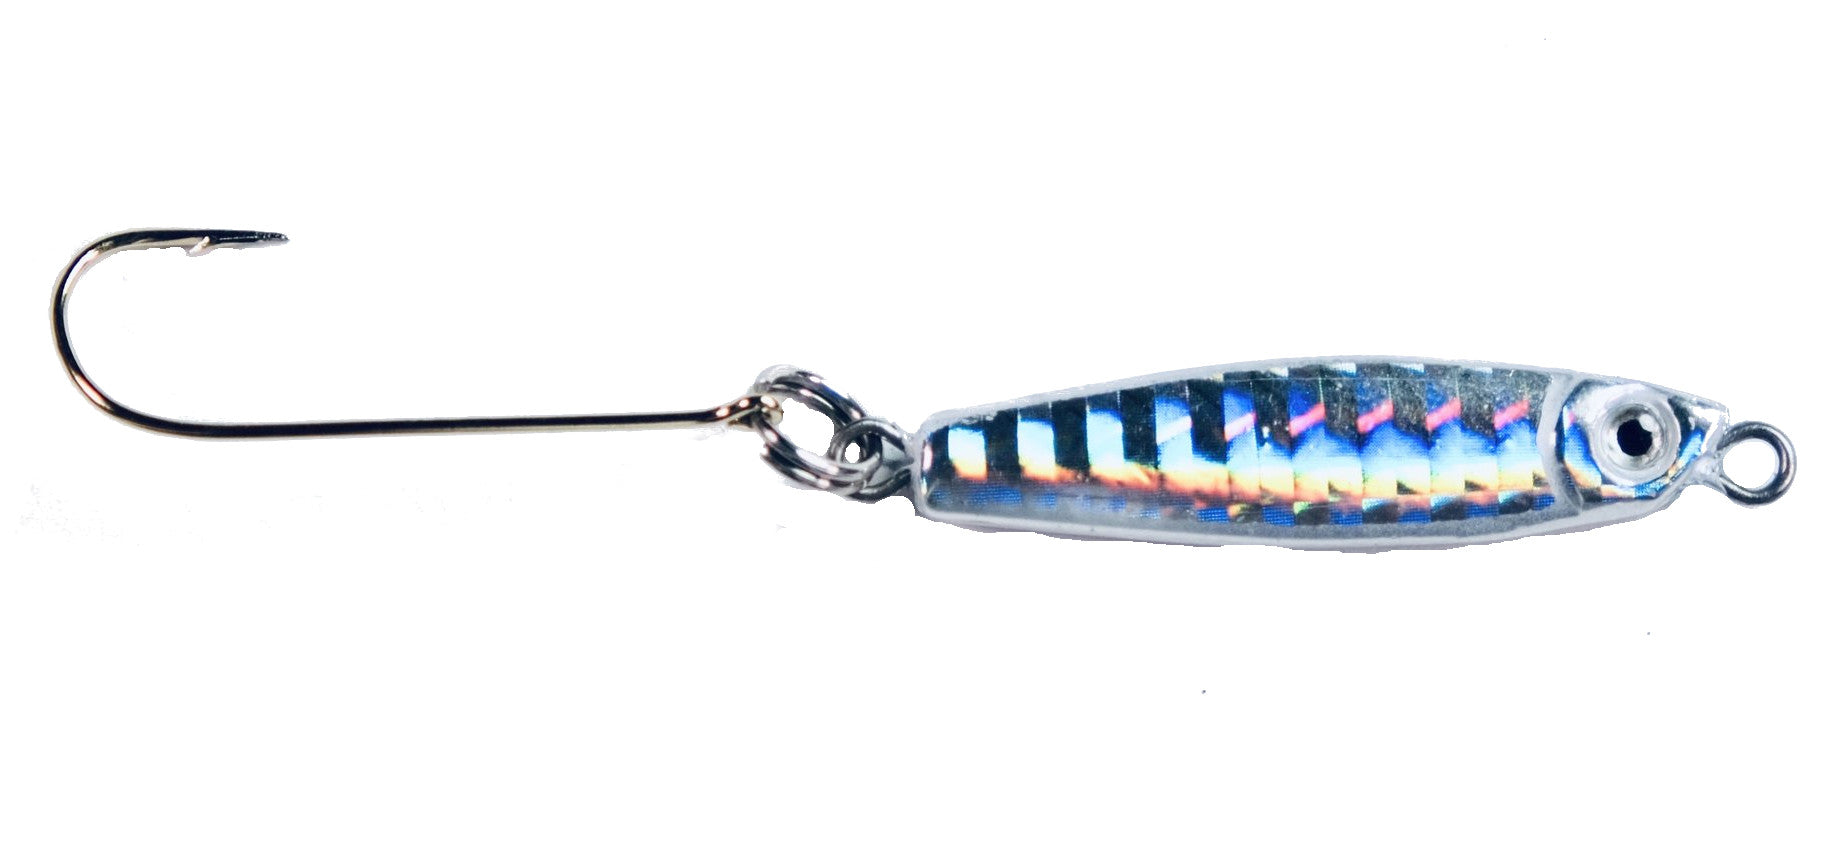 Only 2.79 usd for Jelifish Crappie Bomb Pro Snagless Jig Online at the Shop